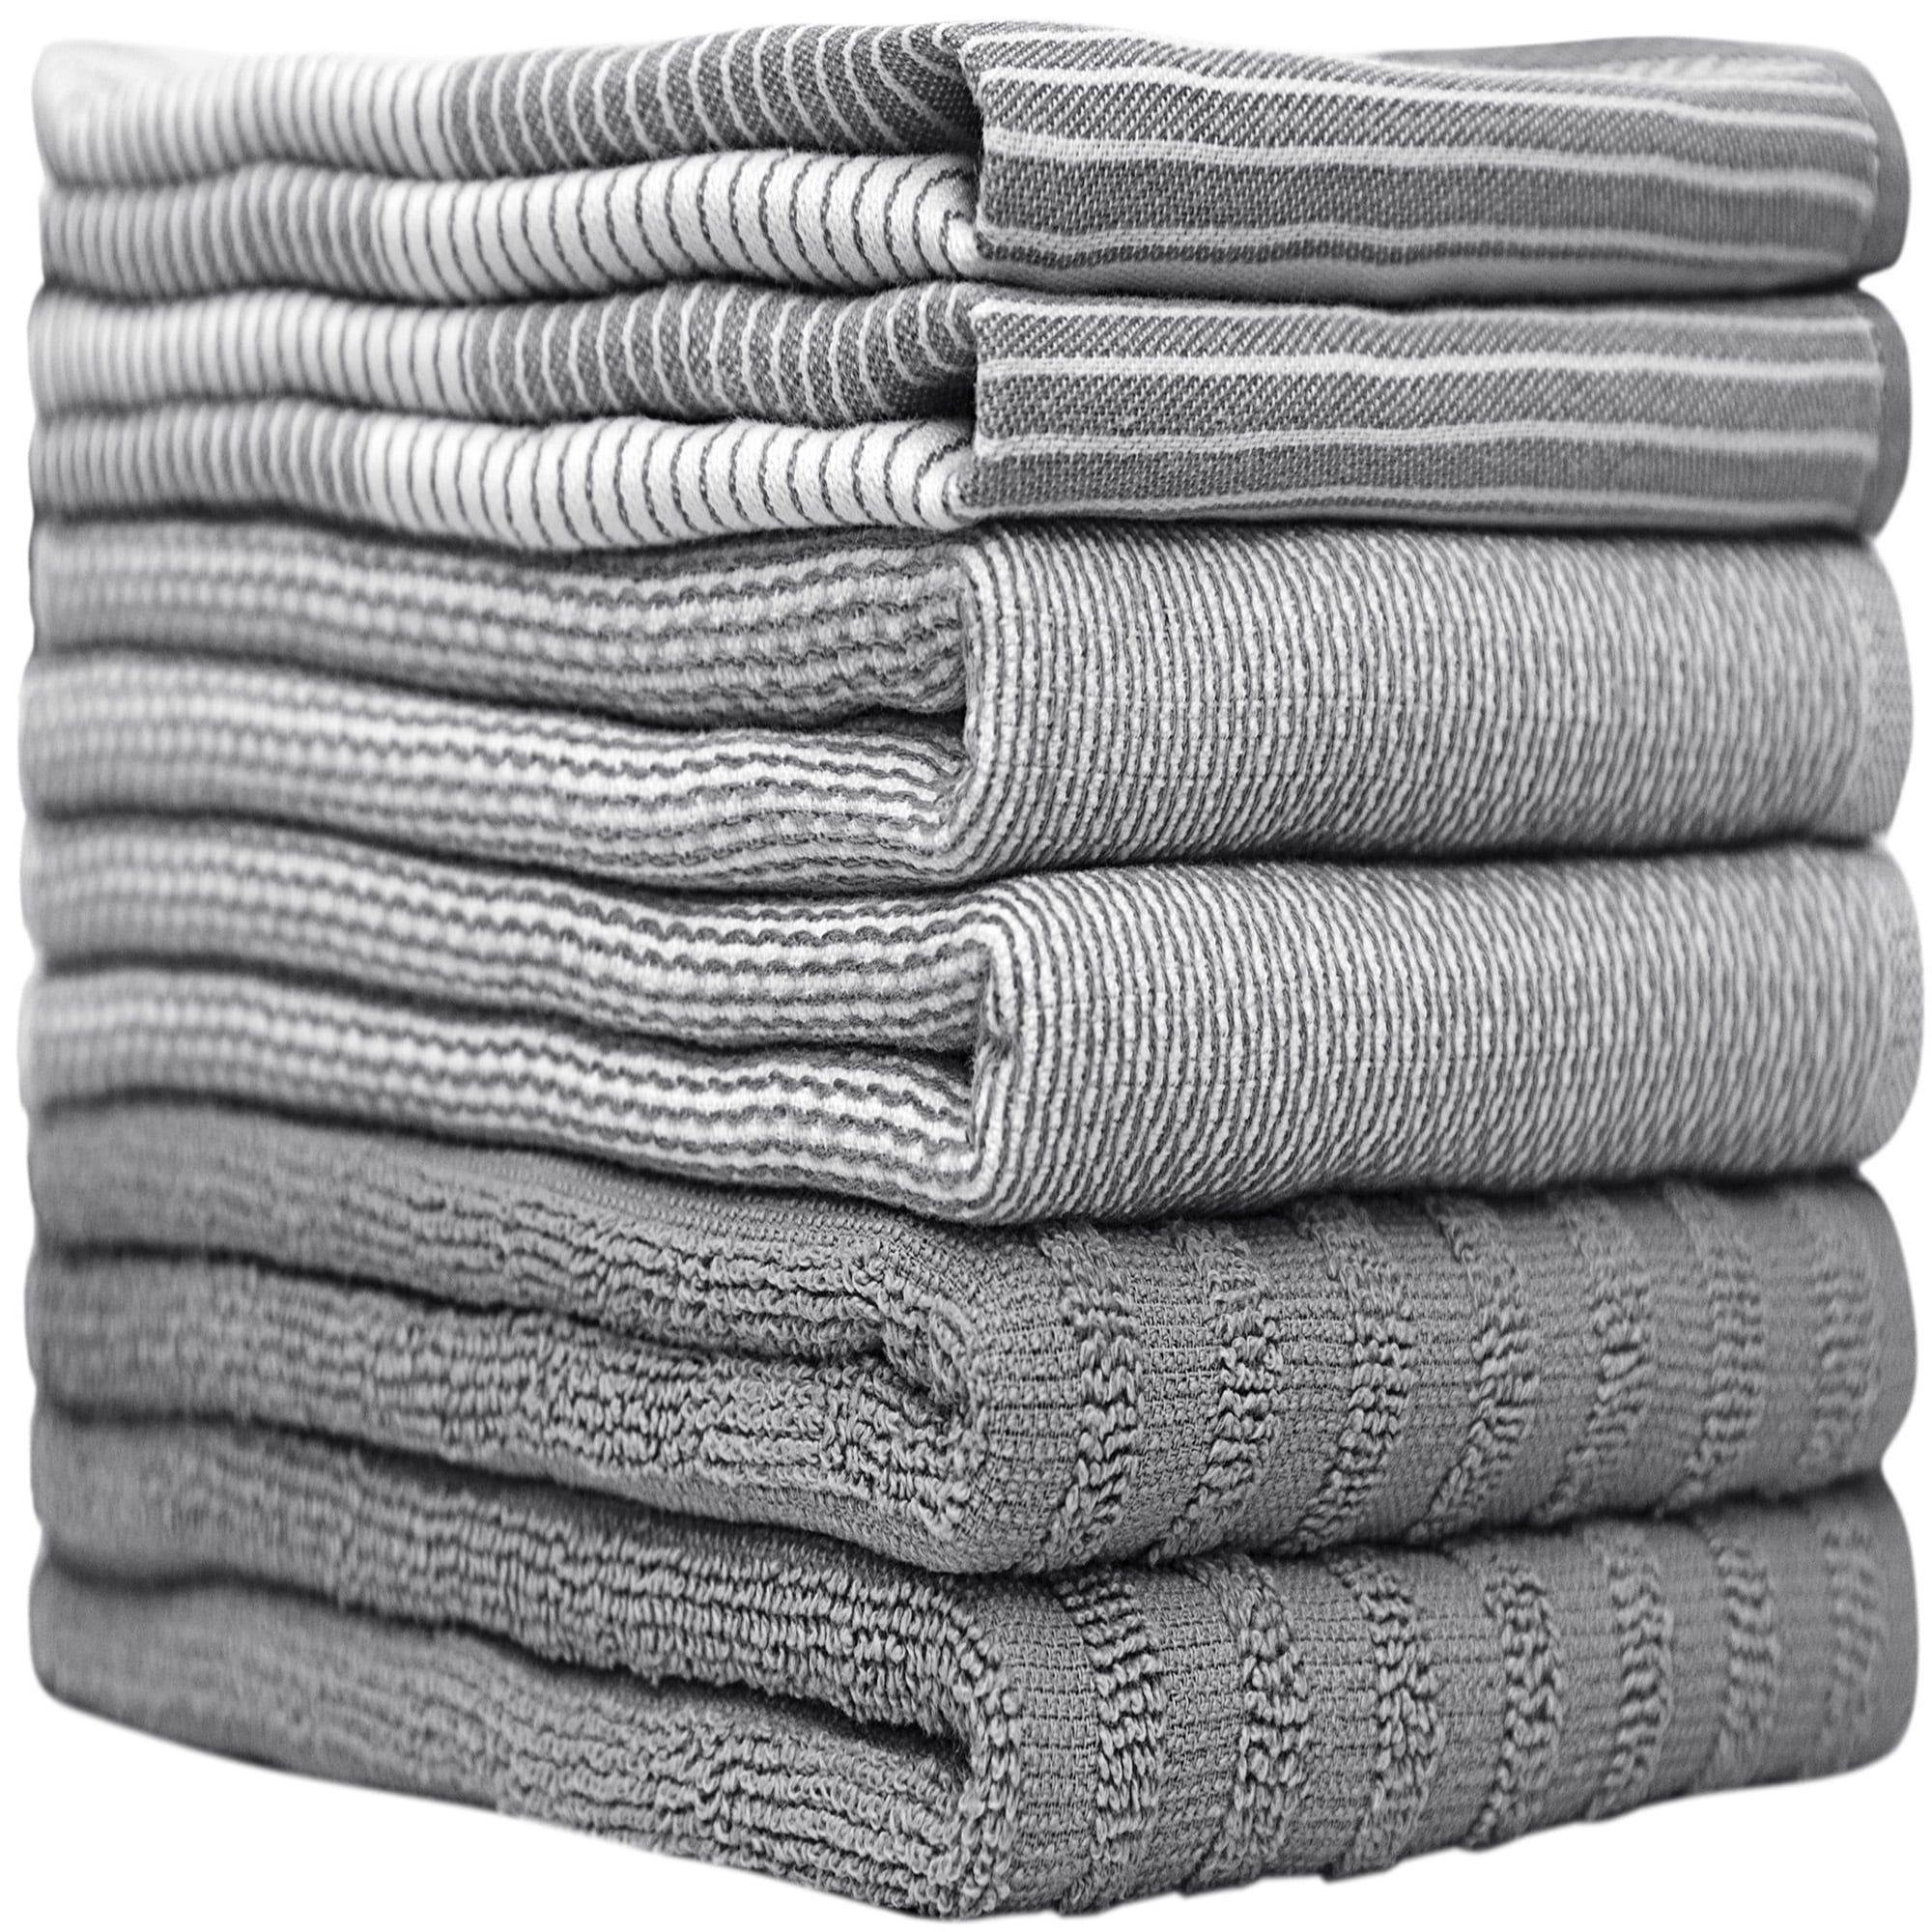 T-Fal 6515902 Charcoal Cotton Kitchen Towel - Pack of 6, 1 - Baker's